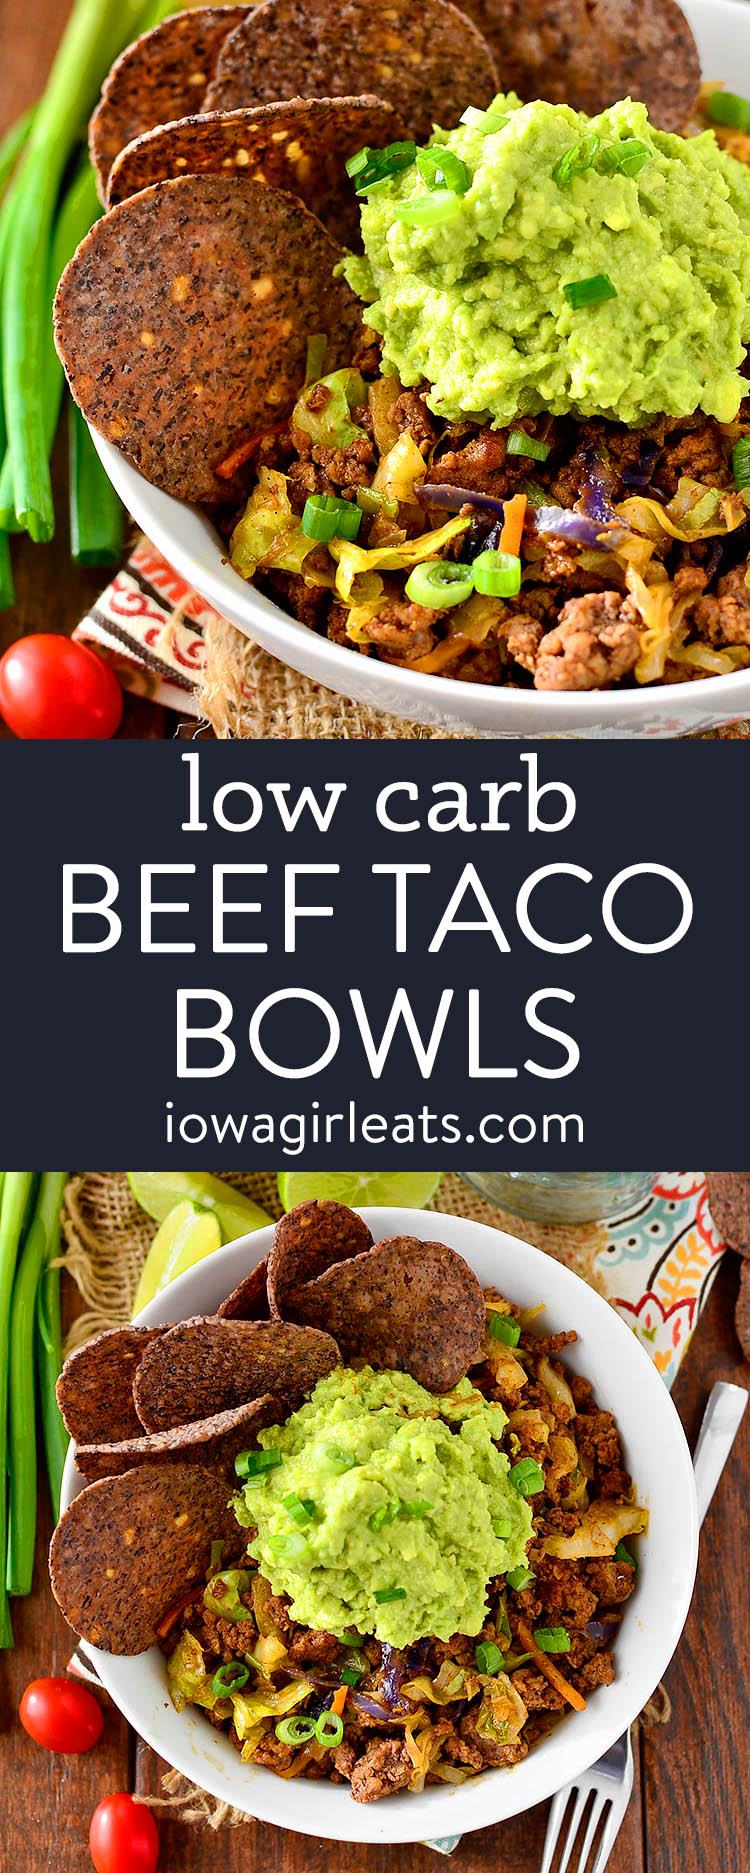 photo collage of low carb beef taco bowls